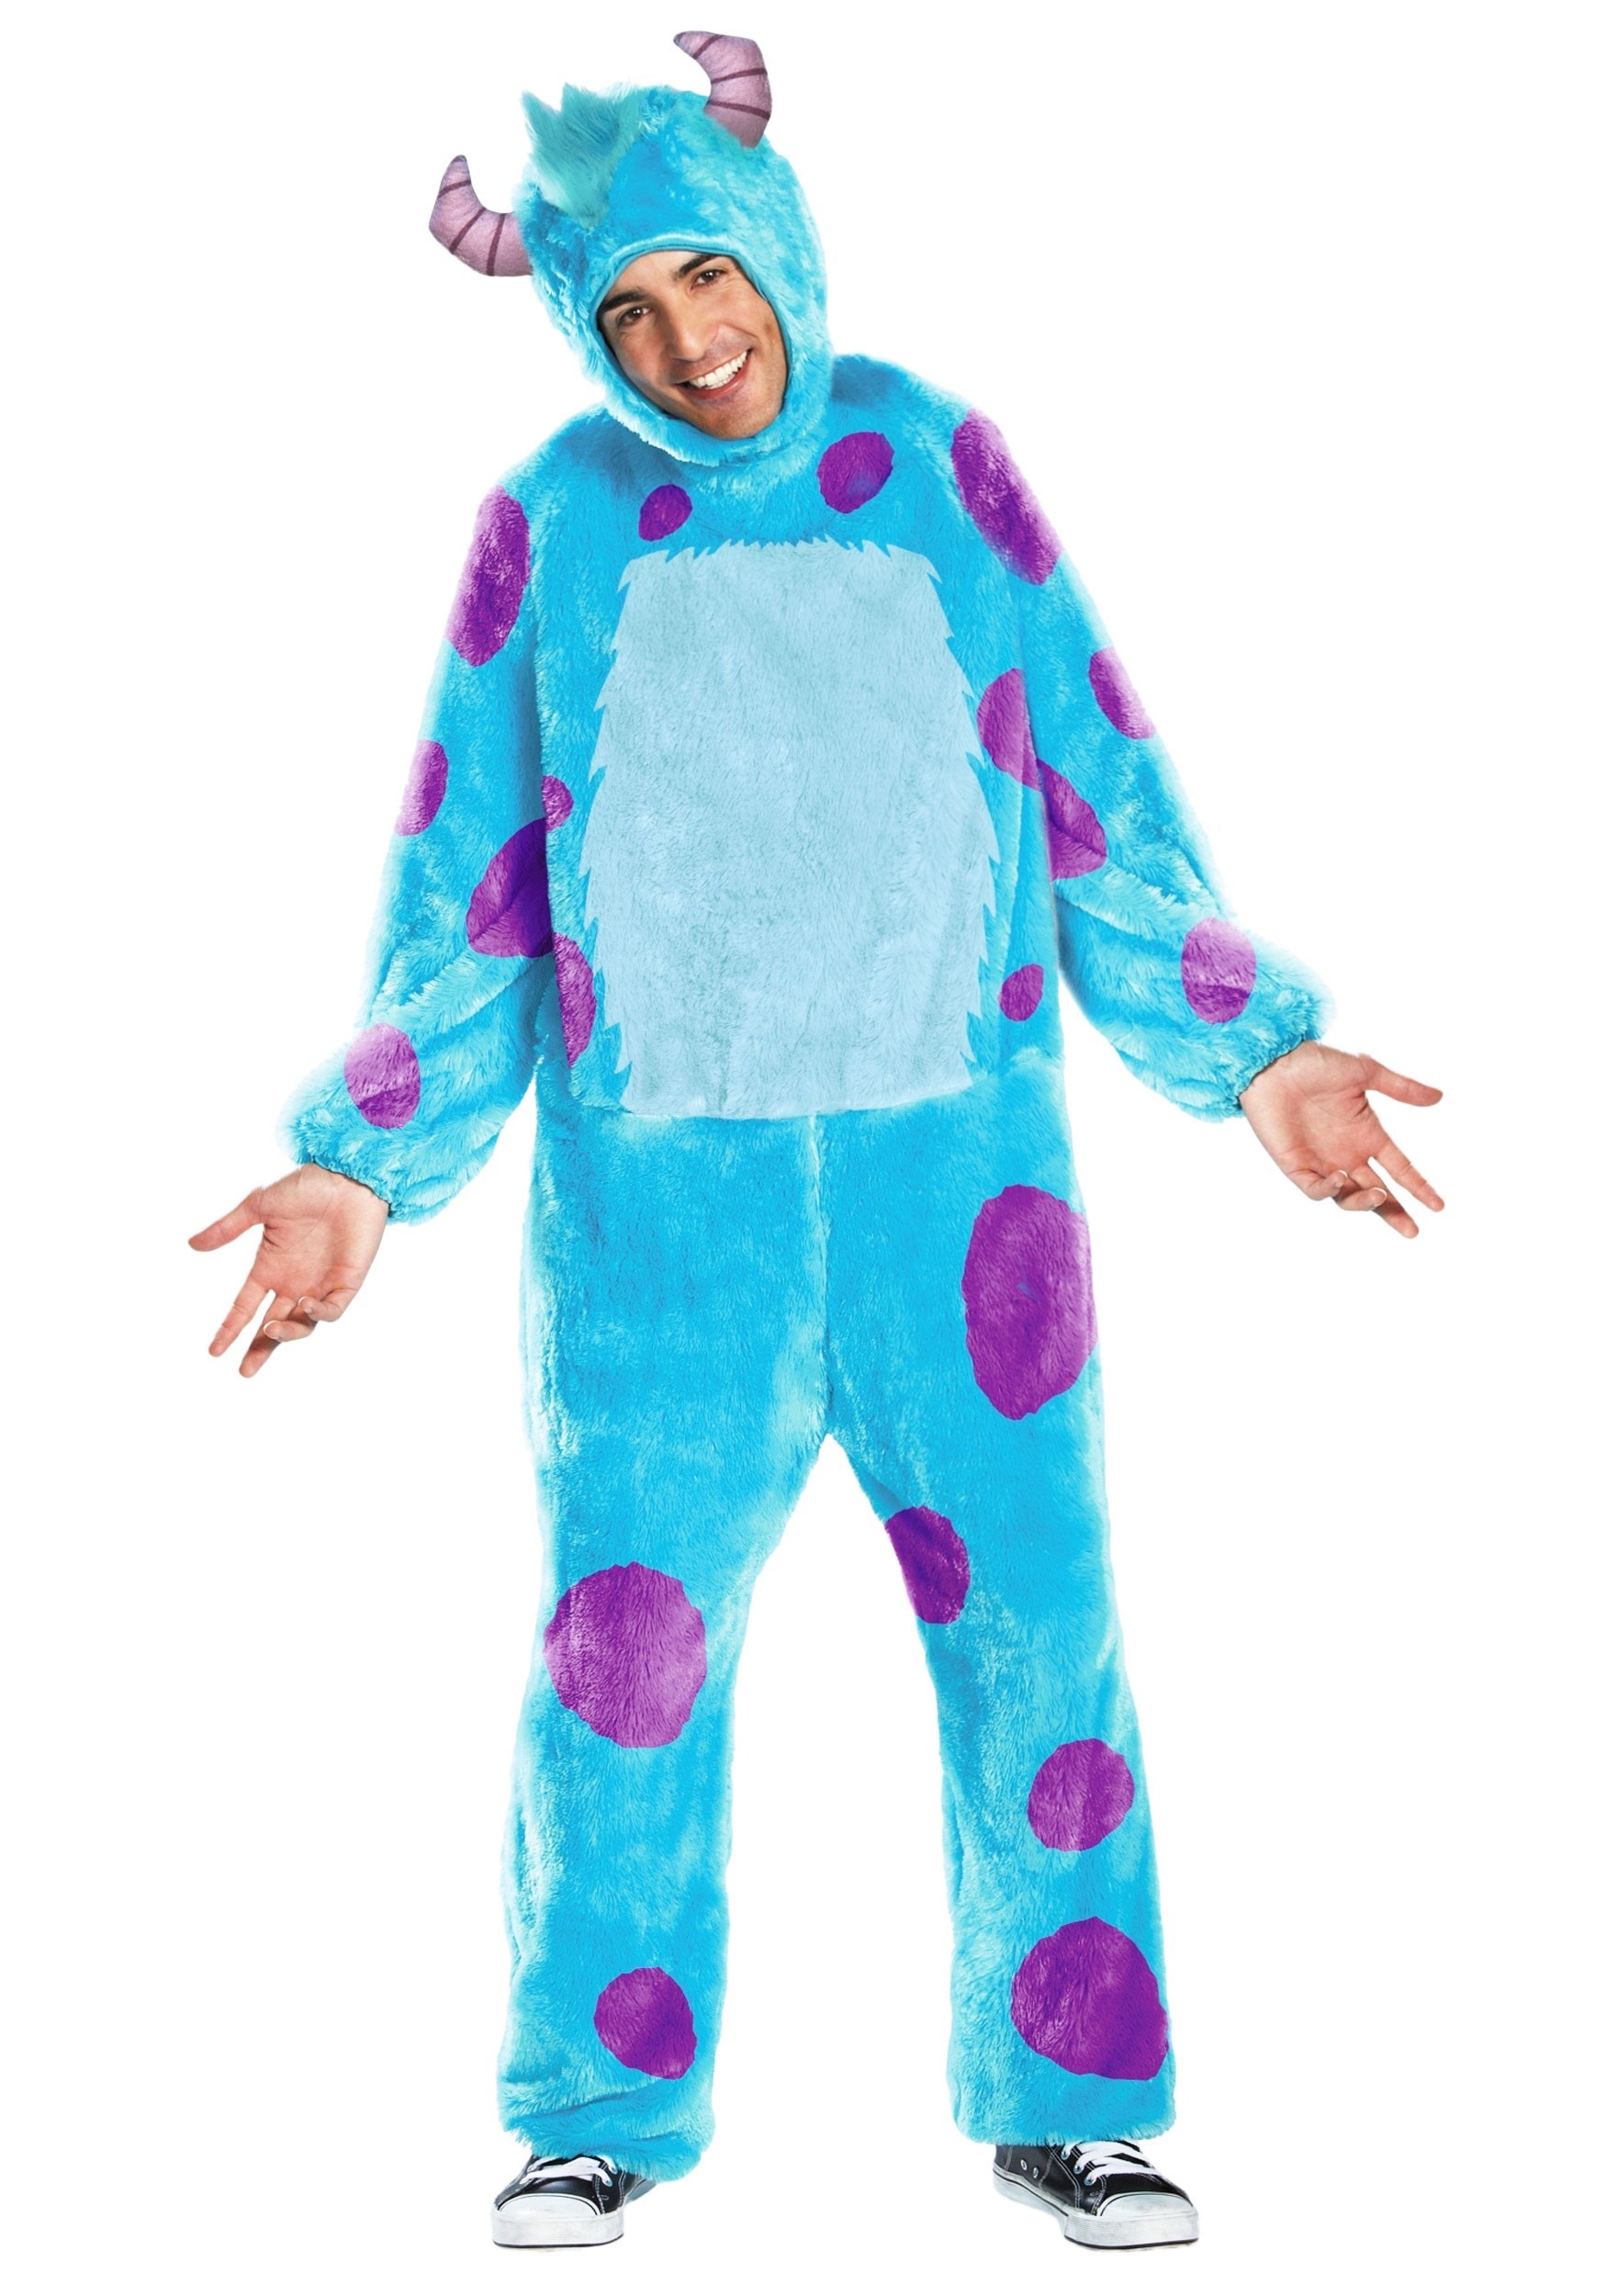 Monsters, Inc Sulley Costume